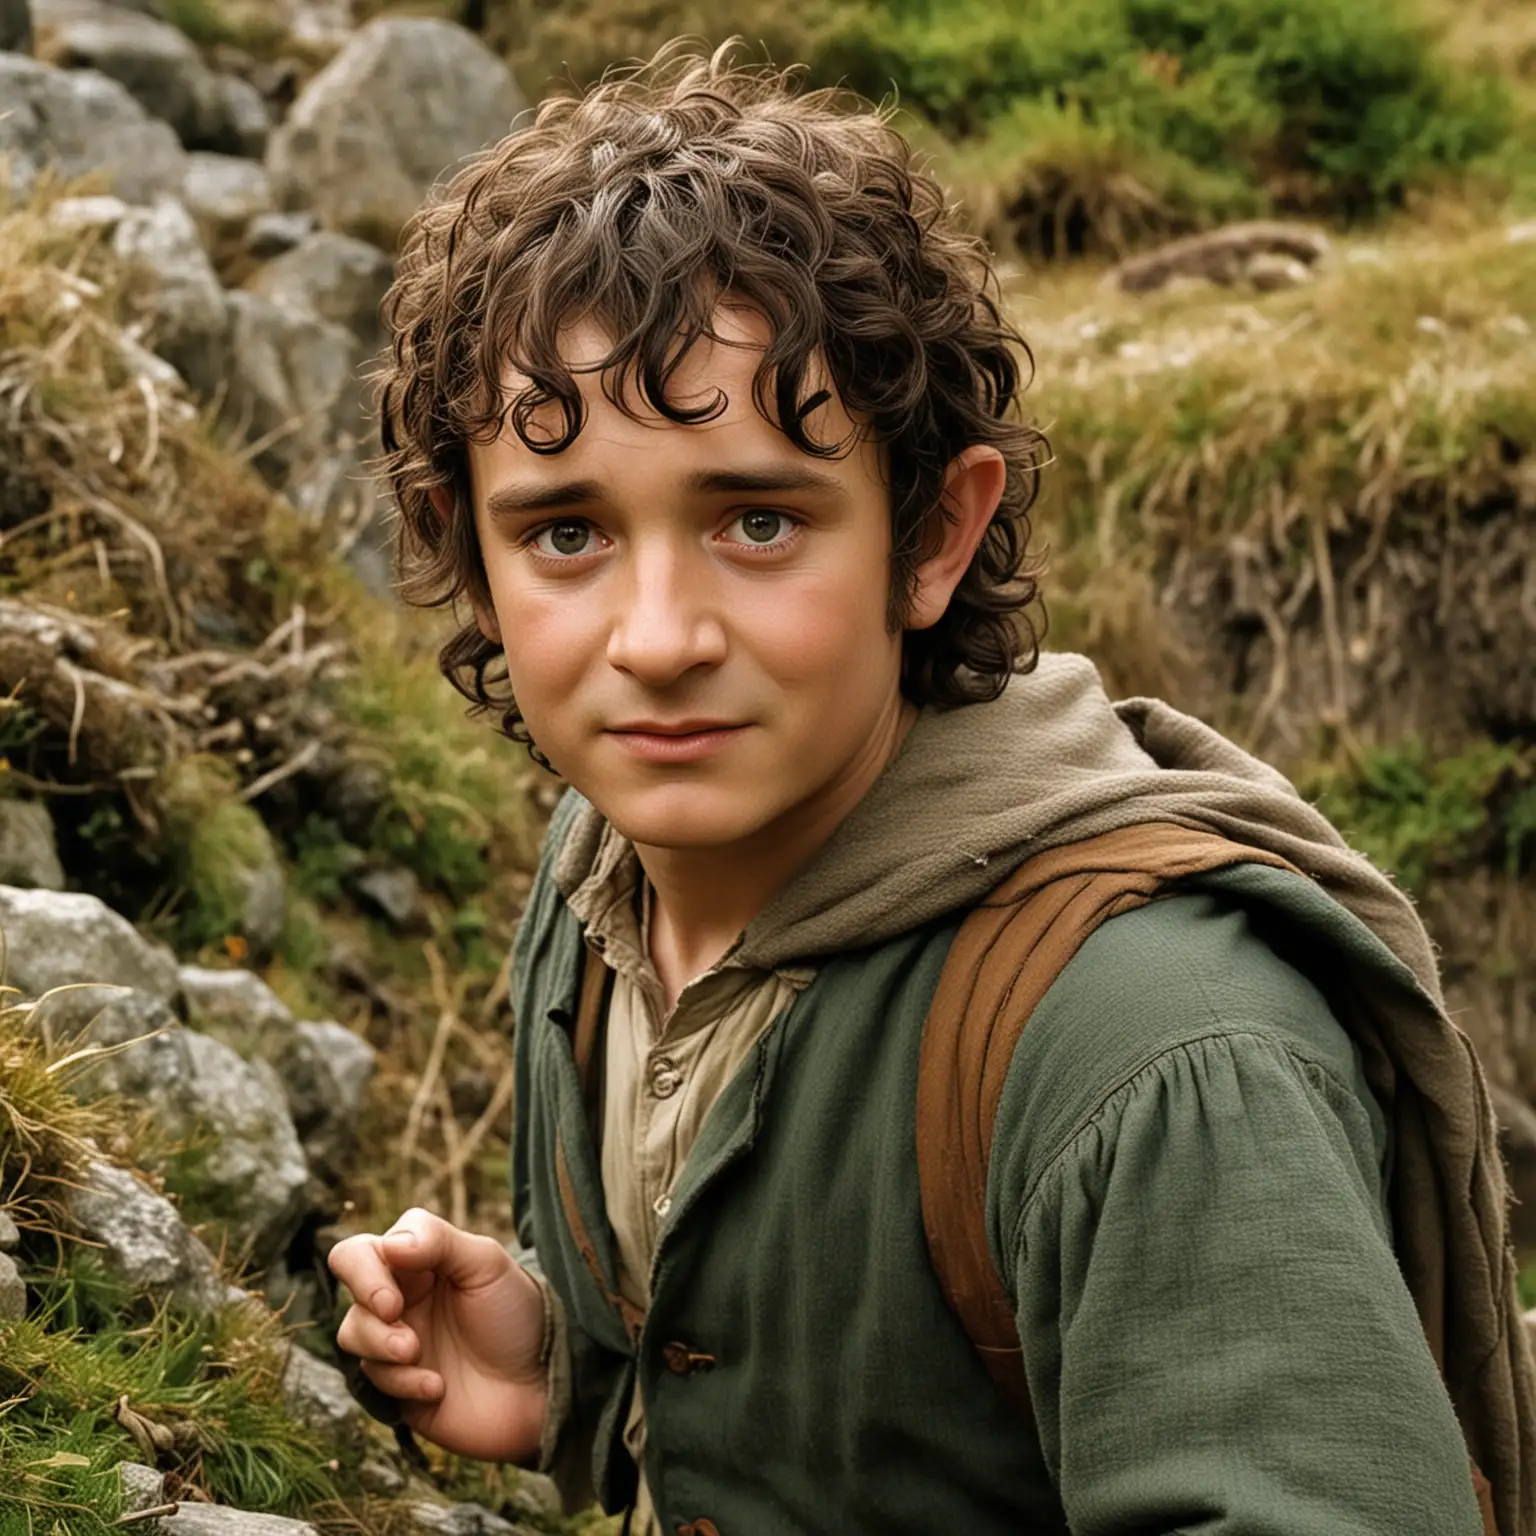 Frodo Baggins, the central character in J.R.R. Tolkien's 'The Lord of the Rings,' is introduced as a humble and unassuming hobbit from the Shire. His physical appearance, like his personality, embodies traits of simplicity, resilience, and quiet strength....